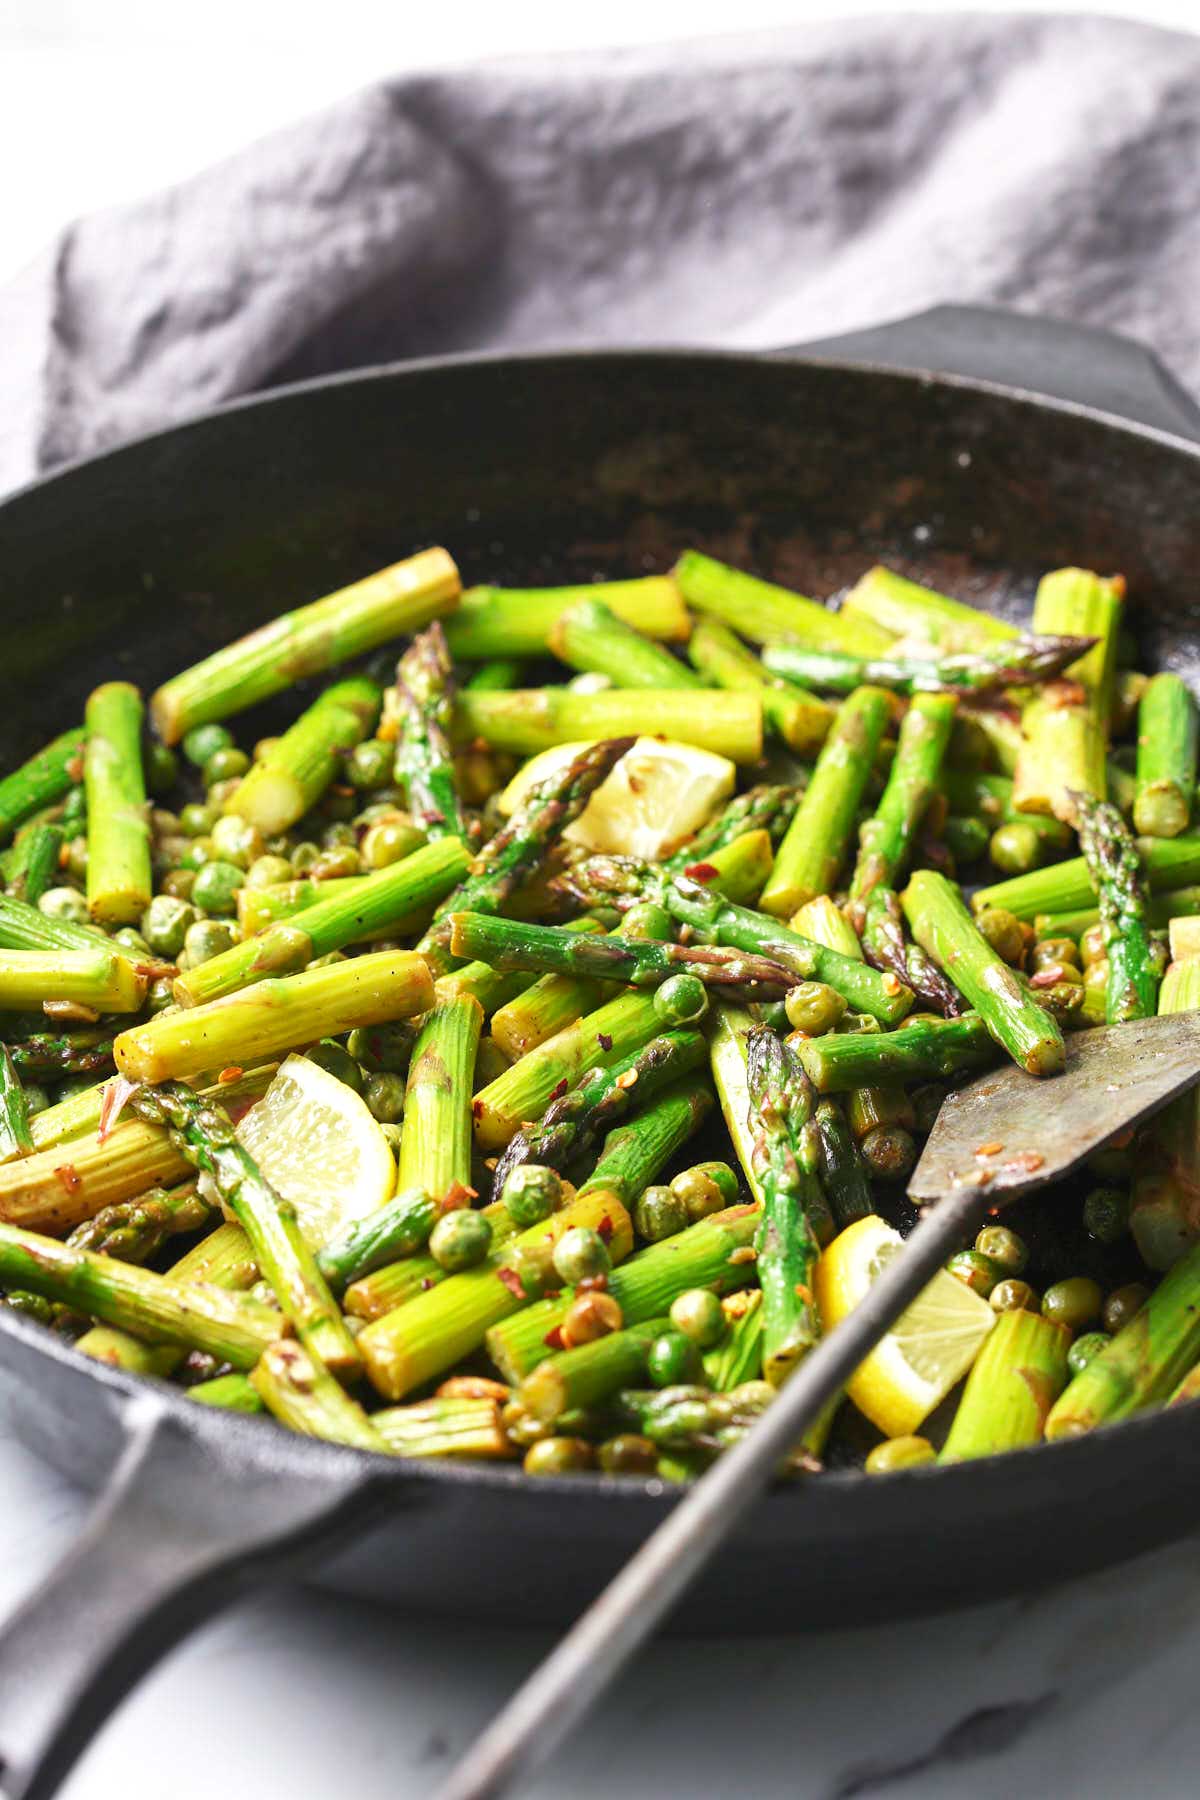 Roasted asparagus and peas in a cast iron pan with a metal spatula.